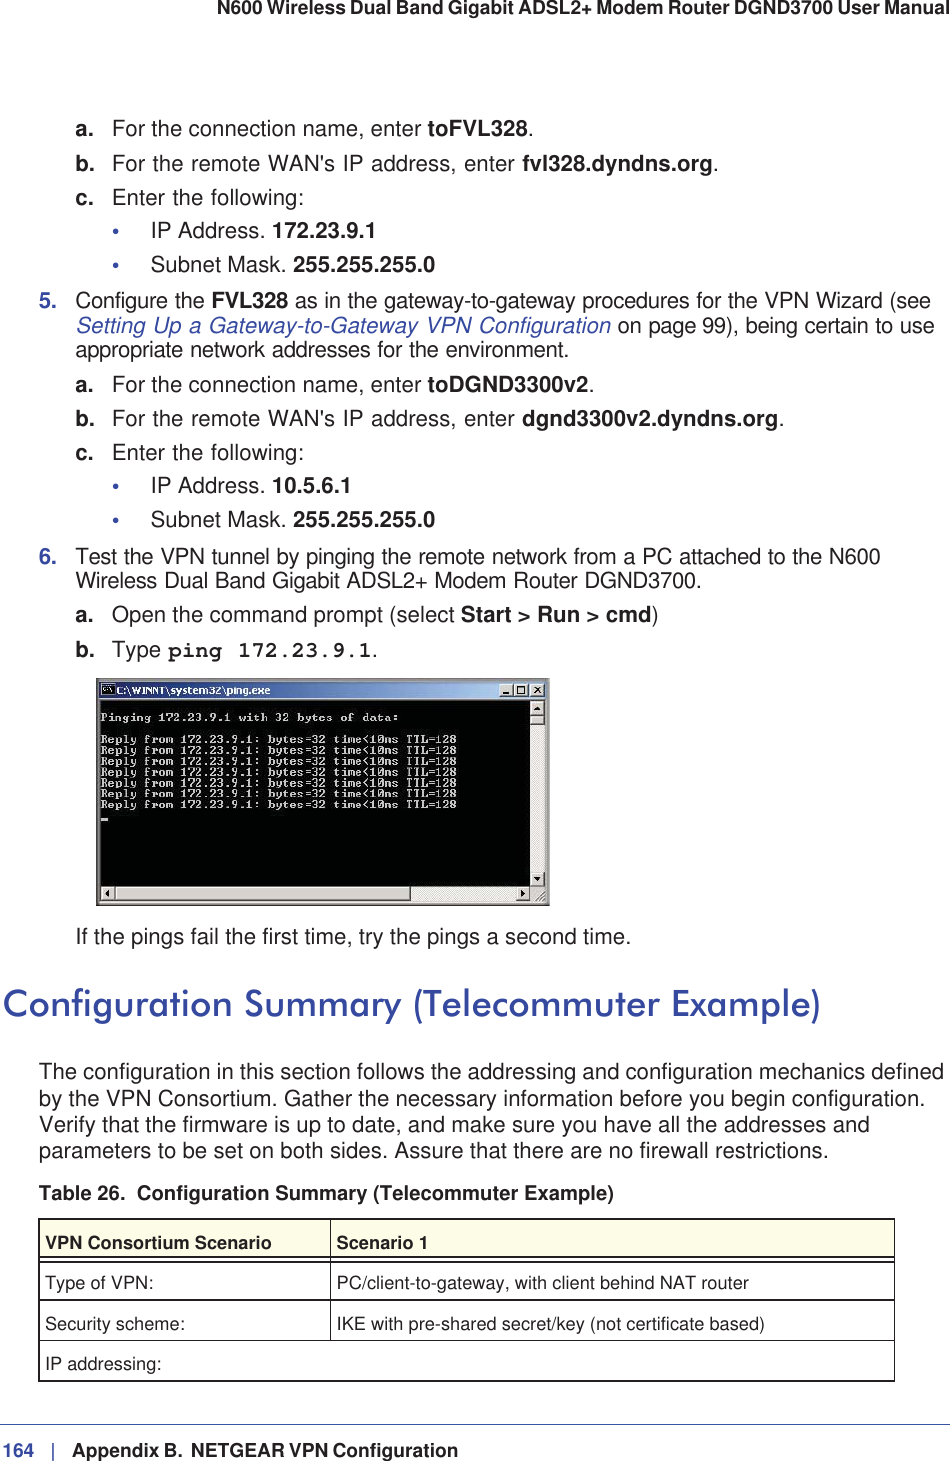 164 |   Appendix B.  NETGEAR VPN Configuration N600 Wireless Dual Band Gigabit ADSL2+ Modem Router DGND3700 User Manual a. For the connection name, enter toFVL328.b. For the remote WAN&apos;s IP address, enter fvl328.dyndns.org.c. Enter the following:•IP Address. 172.23.9.1•Subnet Mask. 255.255.255.05. Configure the FVL328 as in the gateway-to-gateway procedures for the VPN Wizard (see Setting Up a Gateway-to-Gateway VPN Configuration on page 99), being certain to use appropriate network addresses for the environment.a. For the connection name, enter toDGND3300v2.b. For the remote WAN&apos;s IP address, enter dgnd3300v2.dyndns.org.c. Enter the following:•IP Address. 10.5.6.1•Subnet Mask. 255.255.255.06. Test the VPN tunnel by pinging the remote network from a PC attached to the N600 Wireless Dual Band Gigabit ADSL2+ Modem Router DGND3700.a. Open the command prompt (select Start &gt; Run &gt; cmd)b. Type ping 172.23.9.1.If the pings fail the first time, try the pings a second time.Configuration Summary (Telecommuter Example)The configuration in this section follows the addressing and configuration mechanics defined by the VPN Consortium. Gather the necessary information before you begin configuration. Verify that the firmware is up to date, and make sure you have all the addresses and parameters to be set on both sides. Assure that there are no firewall restrictions.Table 26.  Configuration Summary (Telecommuter Example)VPN Consortium Scenario Scenario 1Type of VPN: PC/client-to-gateway, with client behind NAT routerSecurity scheme: IKE with pre-shared secret/key (not certificate based)IP addressing: